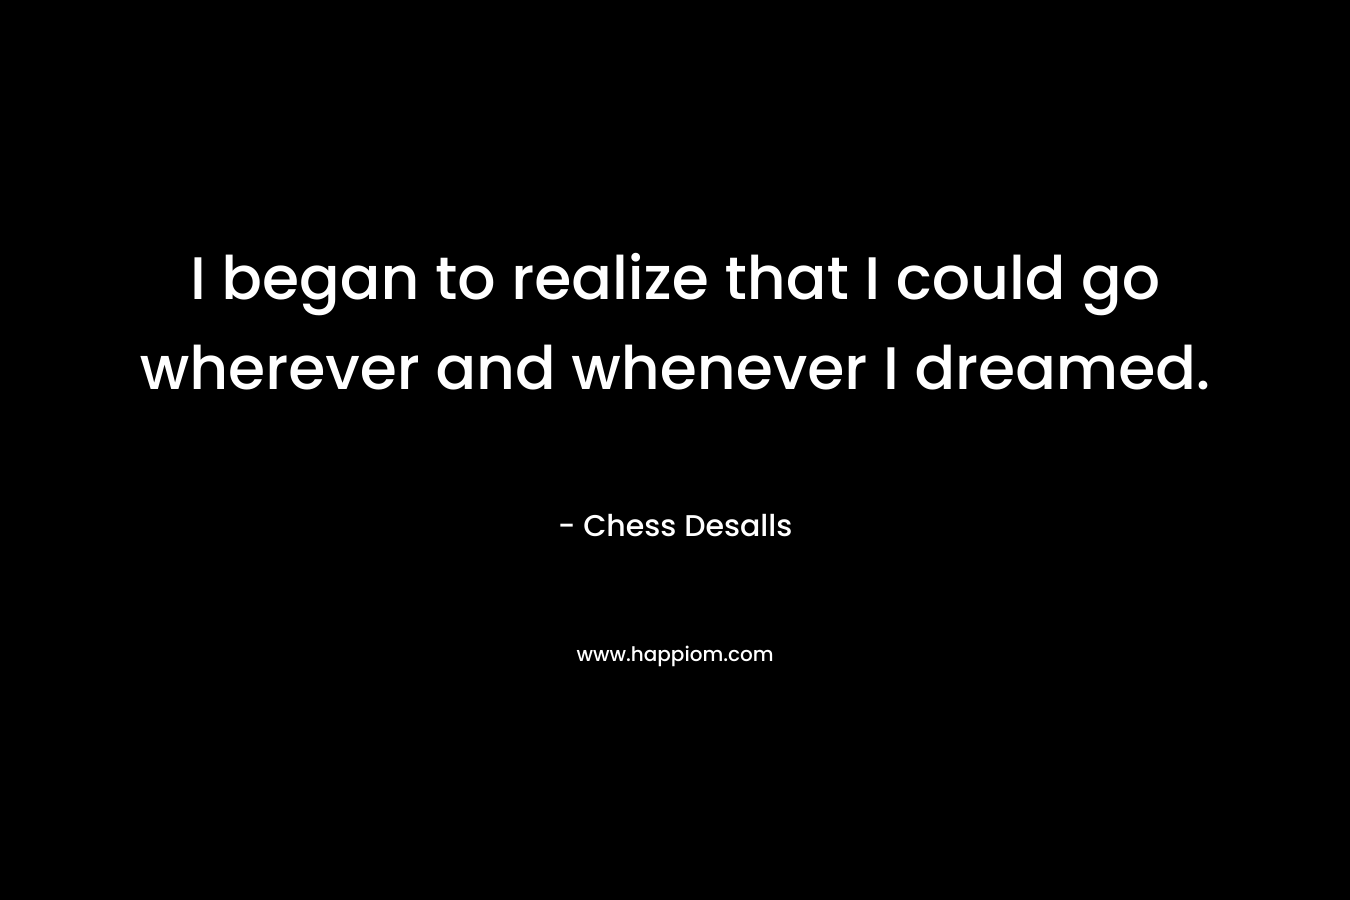 I began to realize that I could go wherever and whenever I dreamed.